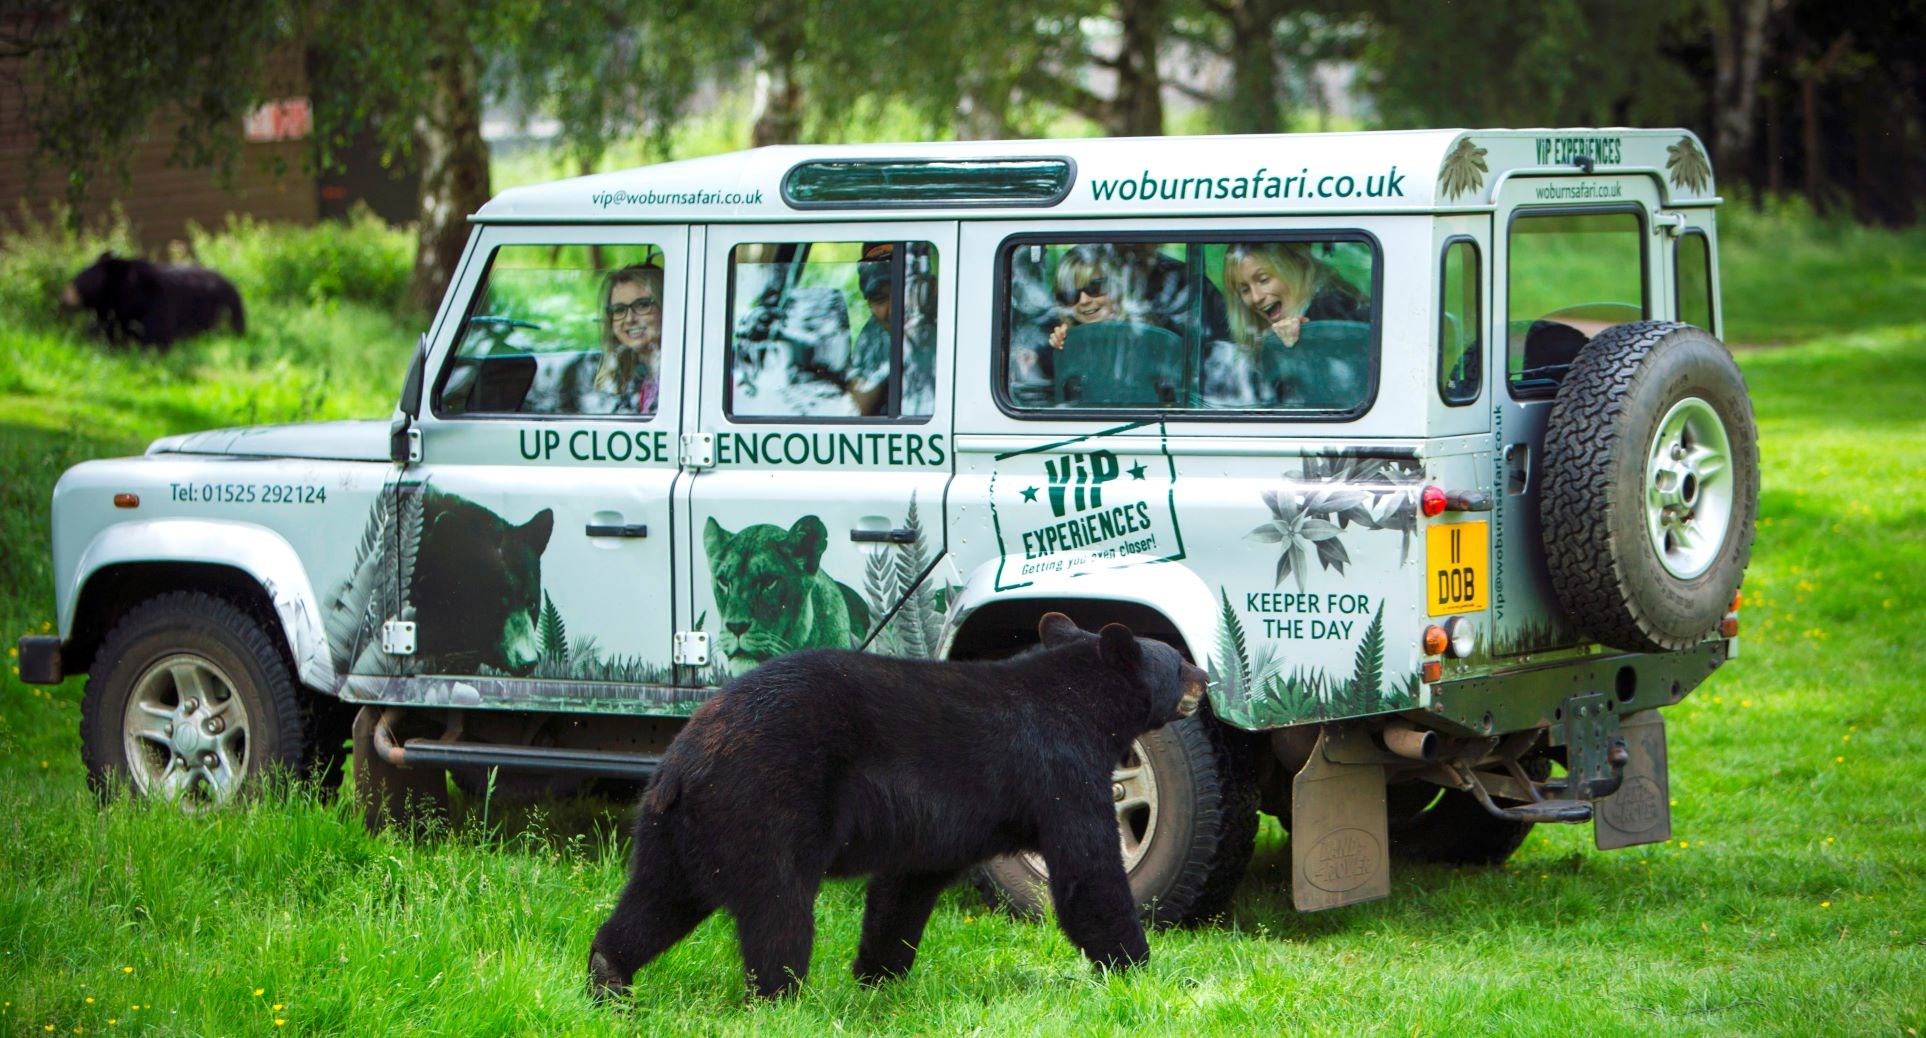 Bear walks up to safari VIP truck in grassy enclosure as guests excitedly watch from inside 